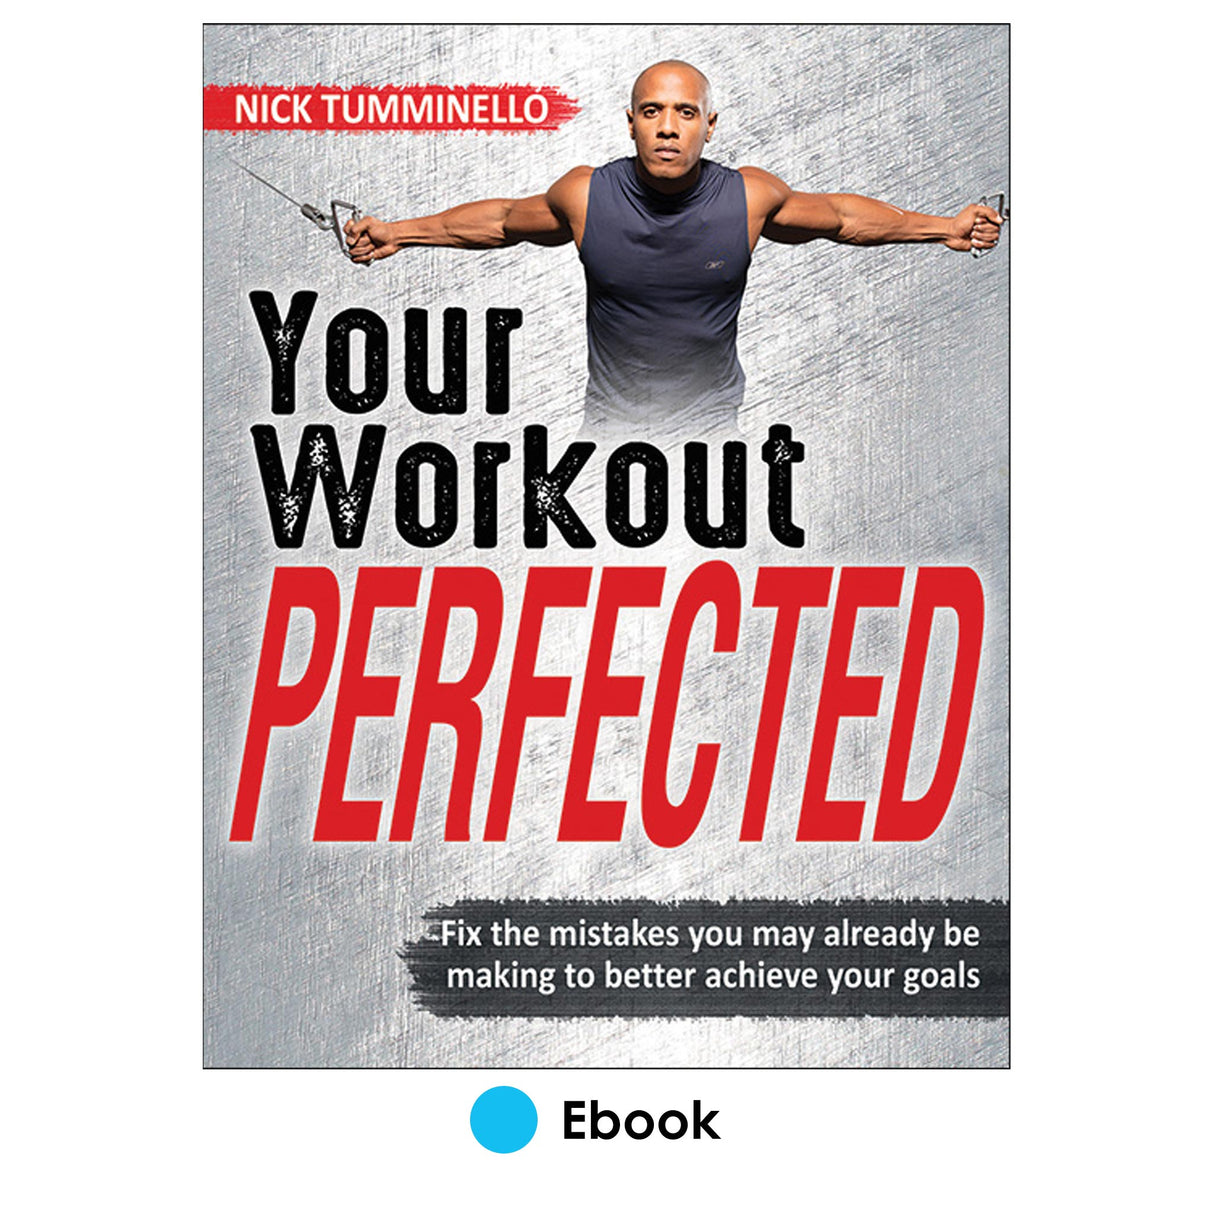 Your Workout PERFECTED epub